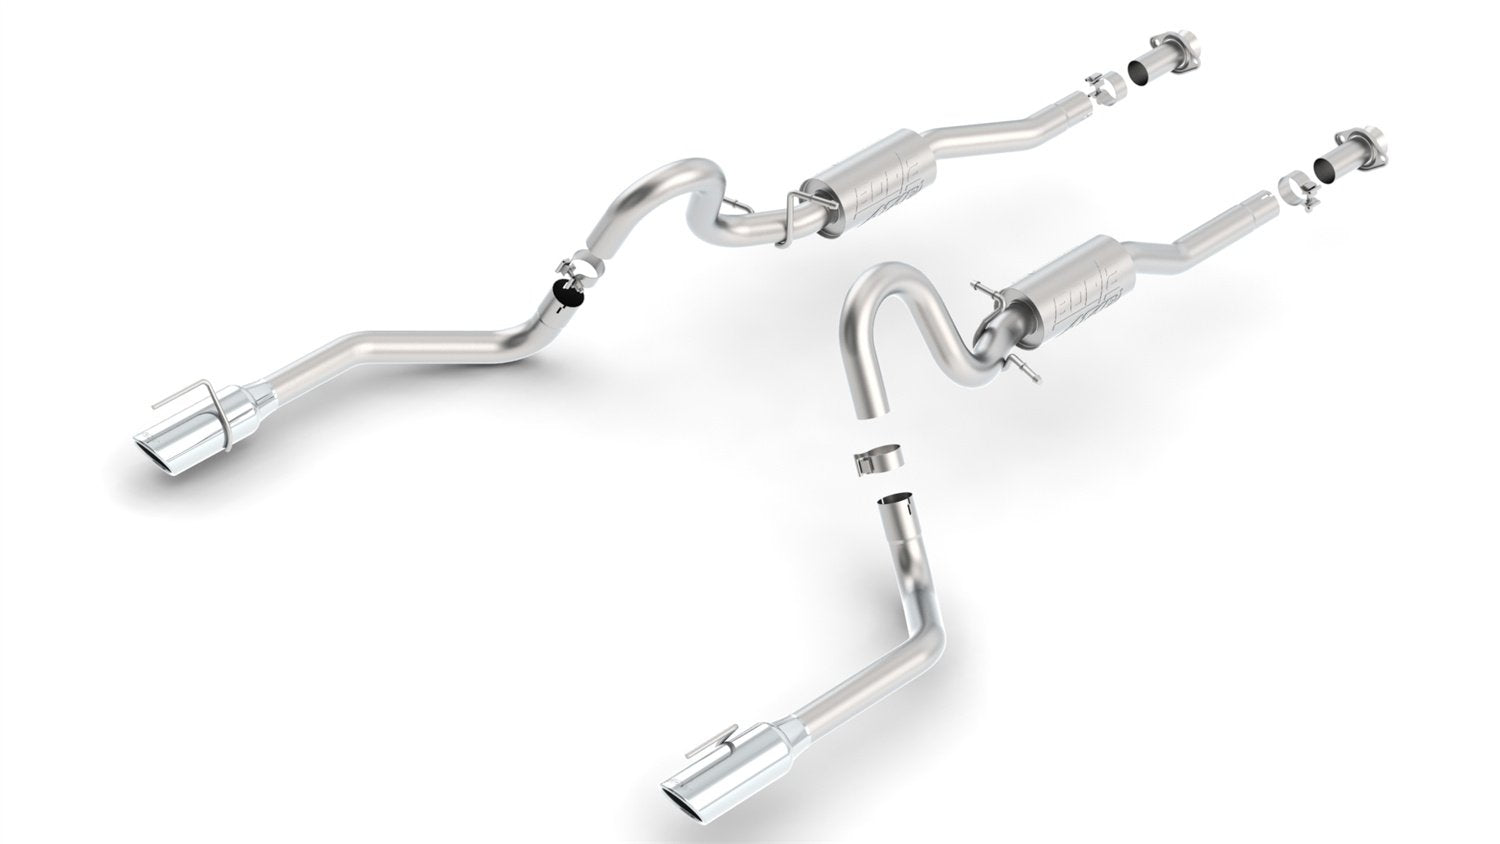 Borla 140458 ATAK Cat-Back Exhaust System for Mustang GT